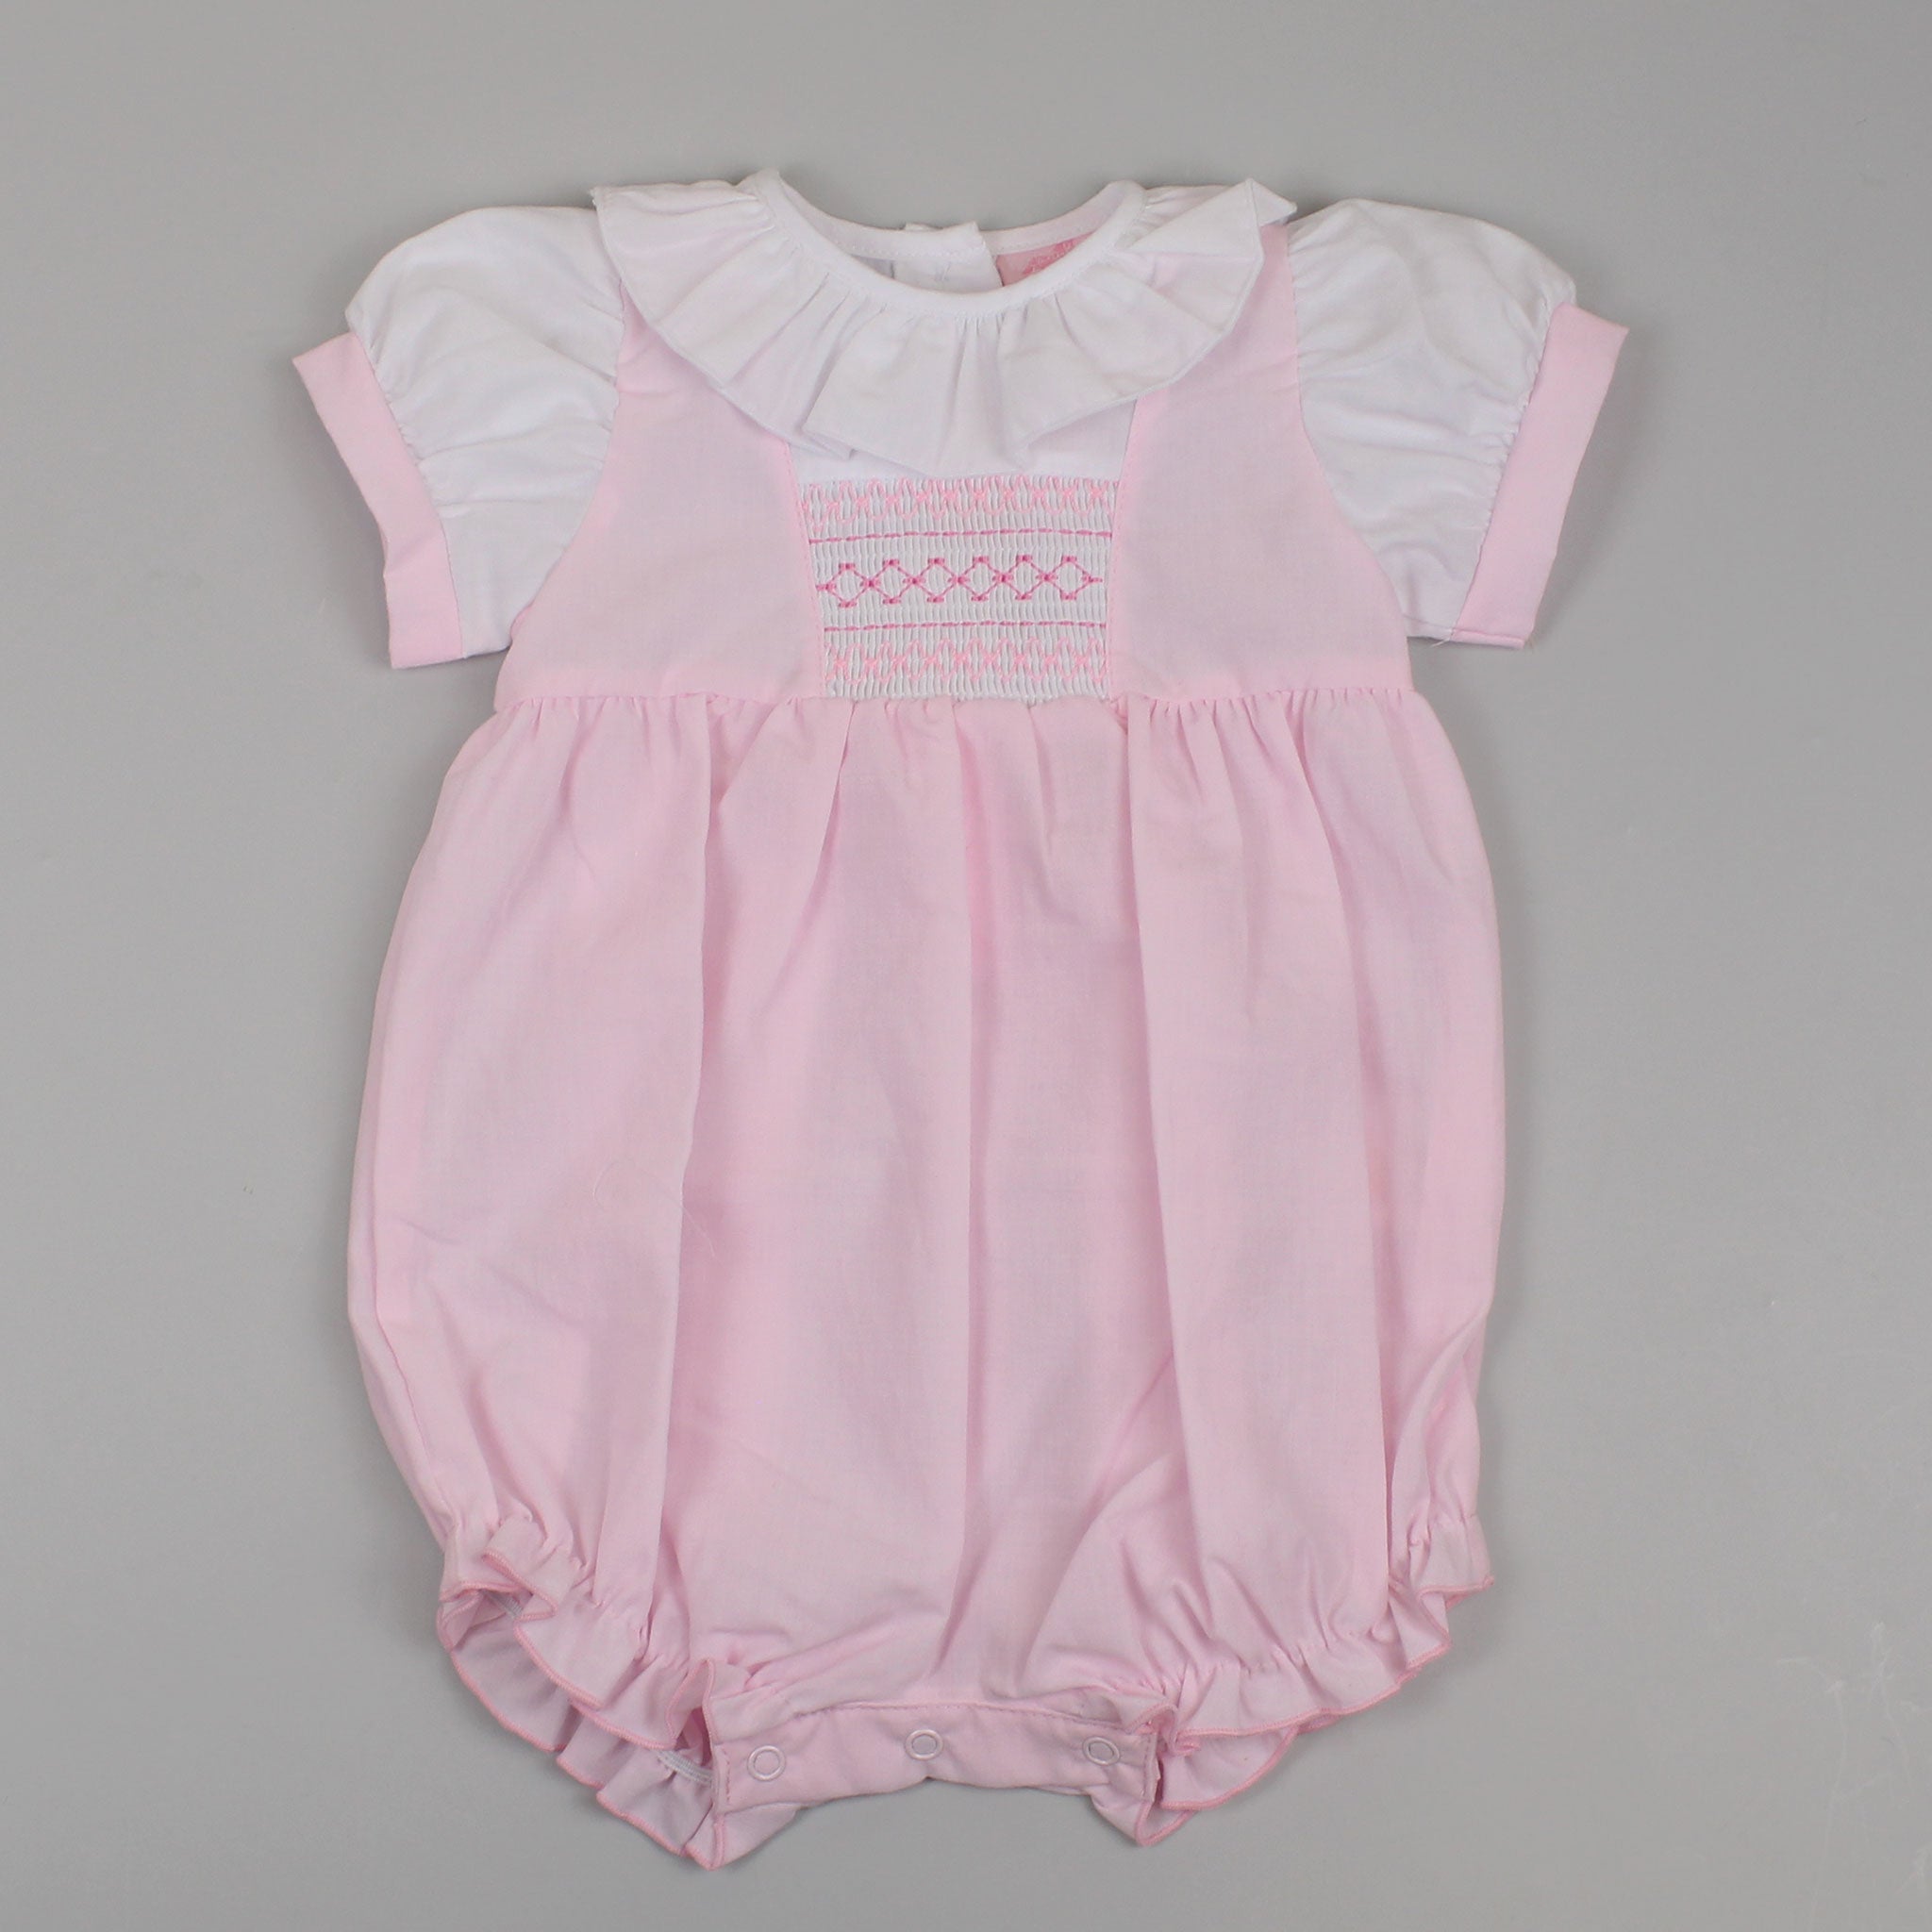 baby girls outfit with smocked design in pink with smocked collar